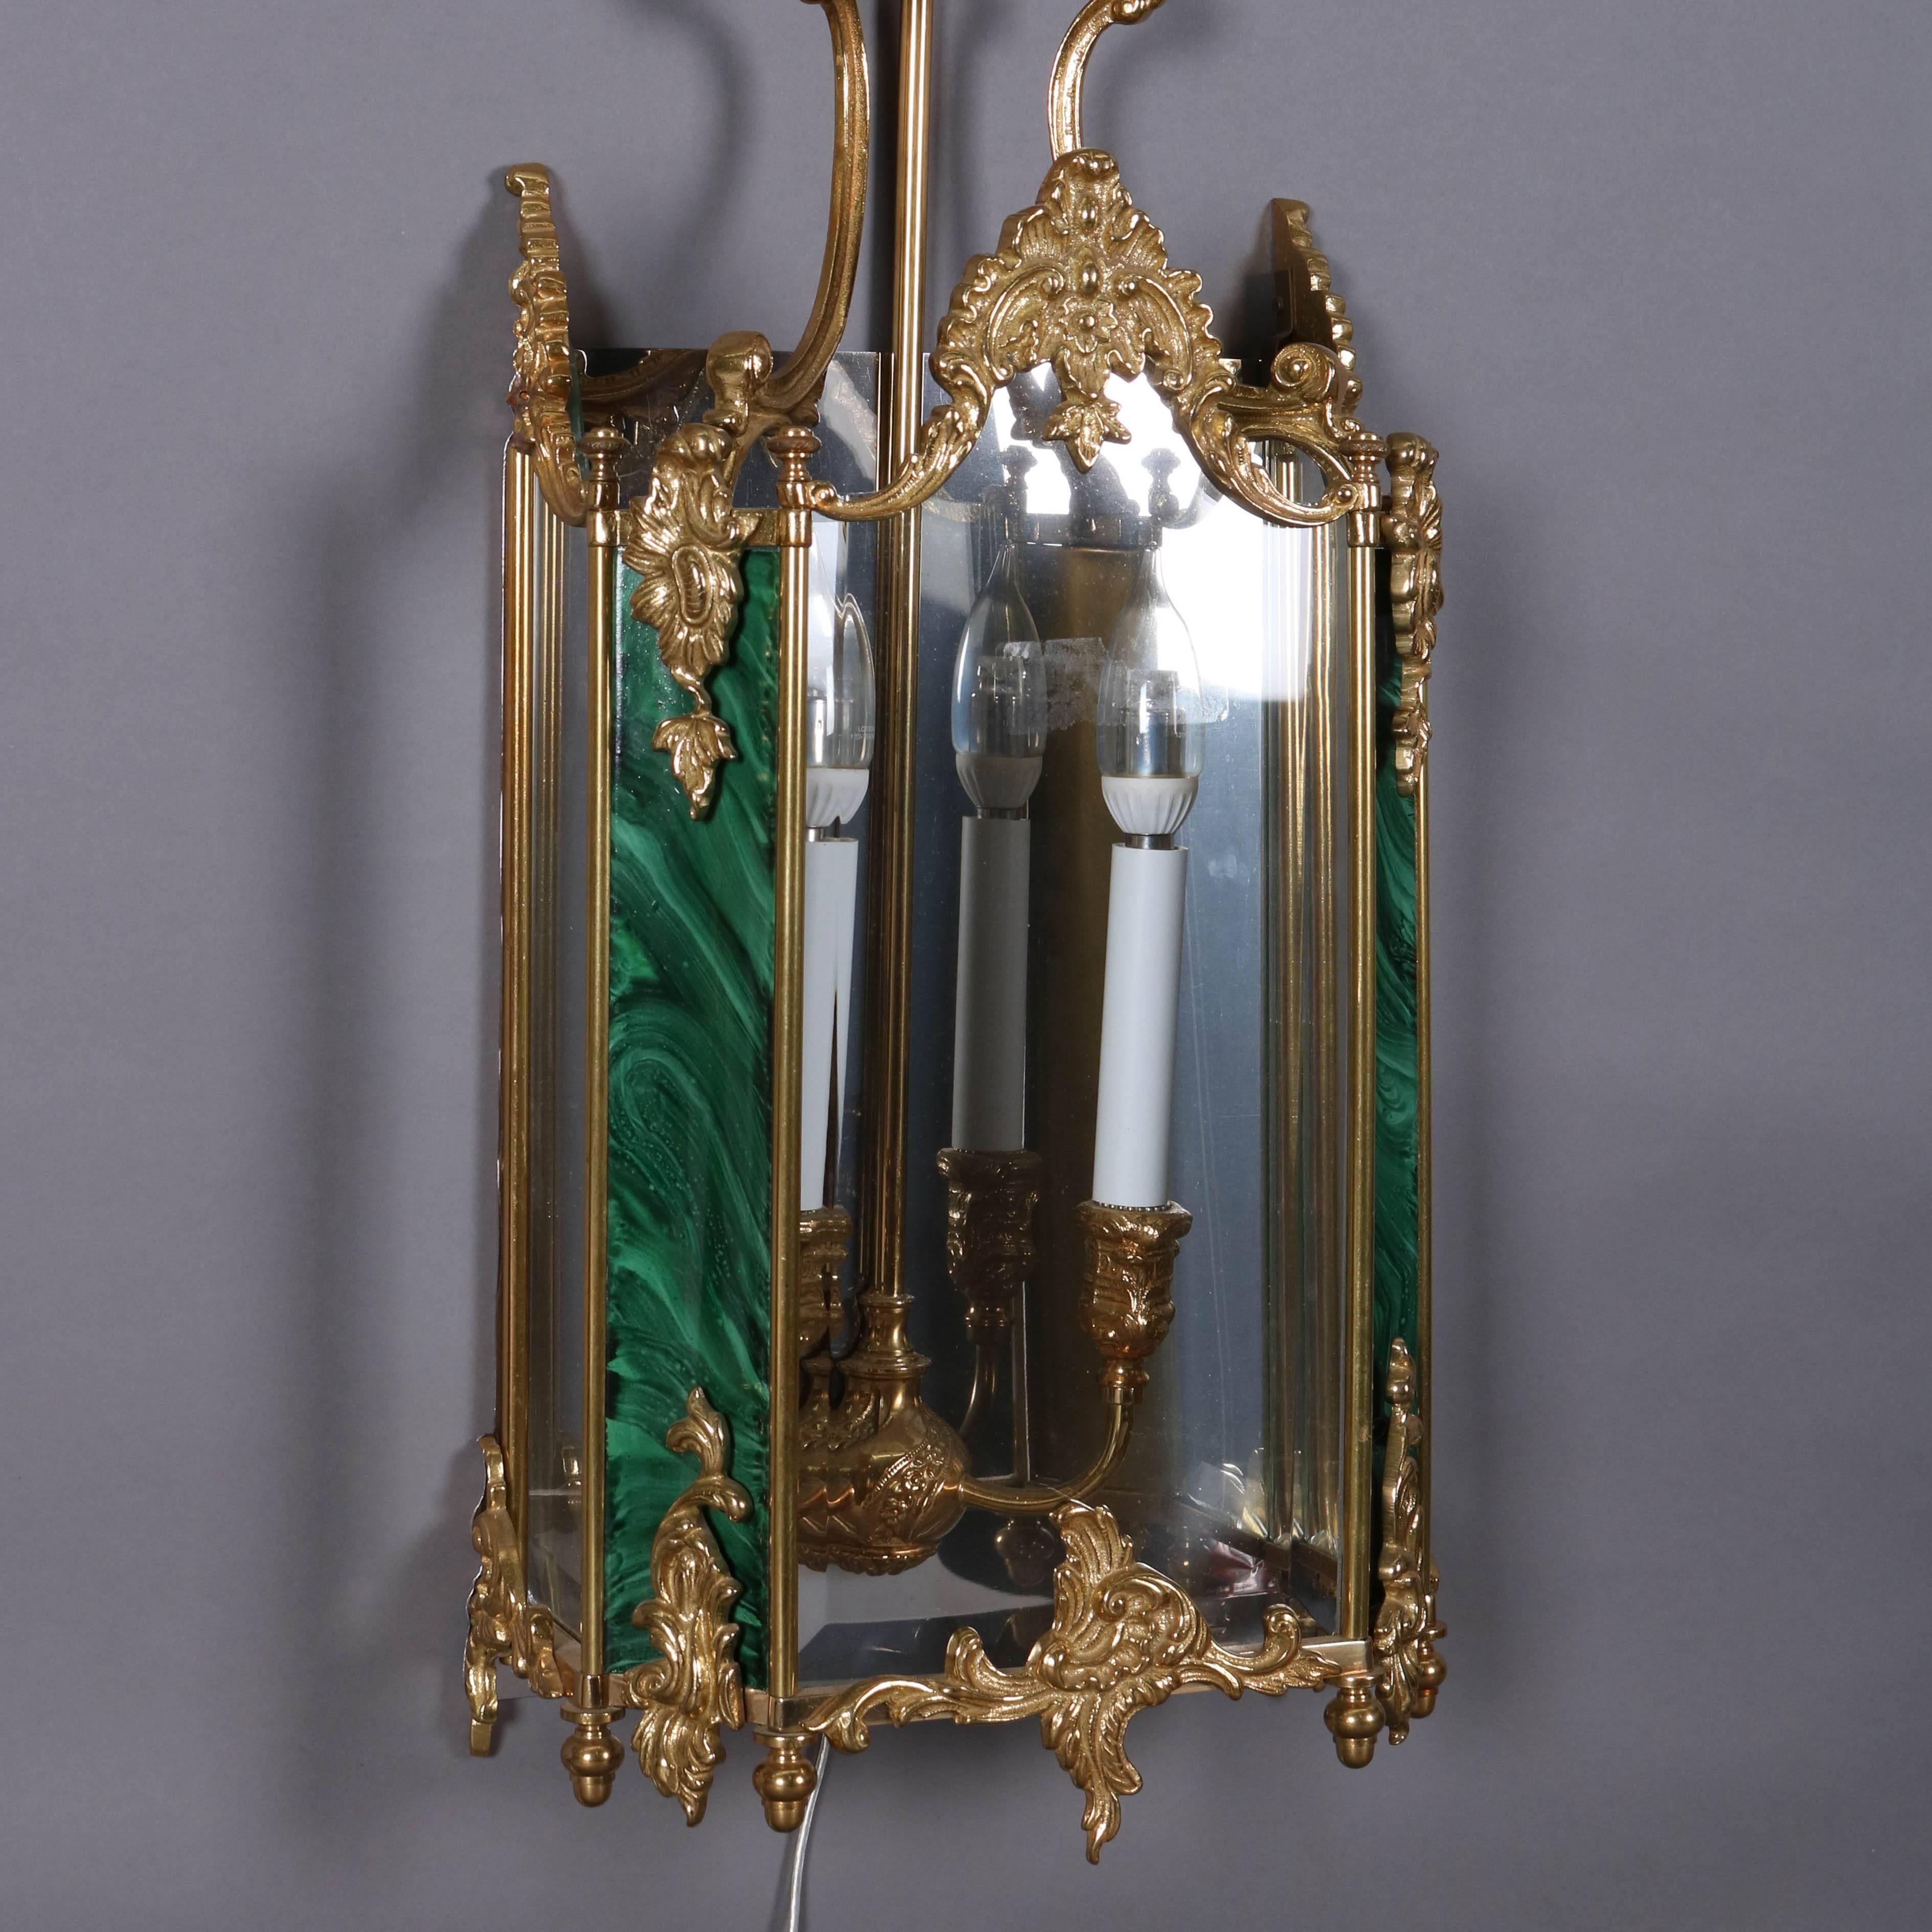 Pair French style gilt bronze and faux malachite panelled mirrored wall sconces, 20th century.

Note: Plug optional, can be hardwired

Measures: 27.5" H x 11" W x 6" D.